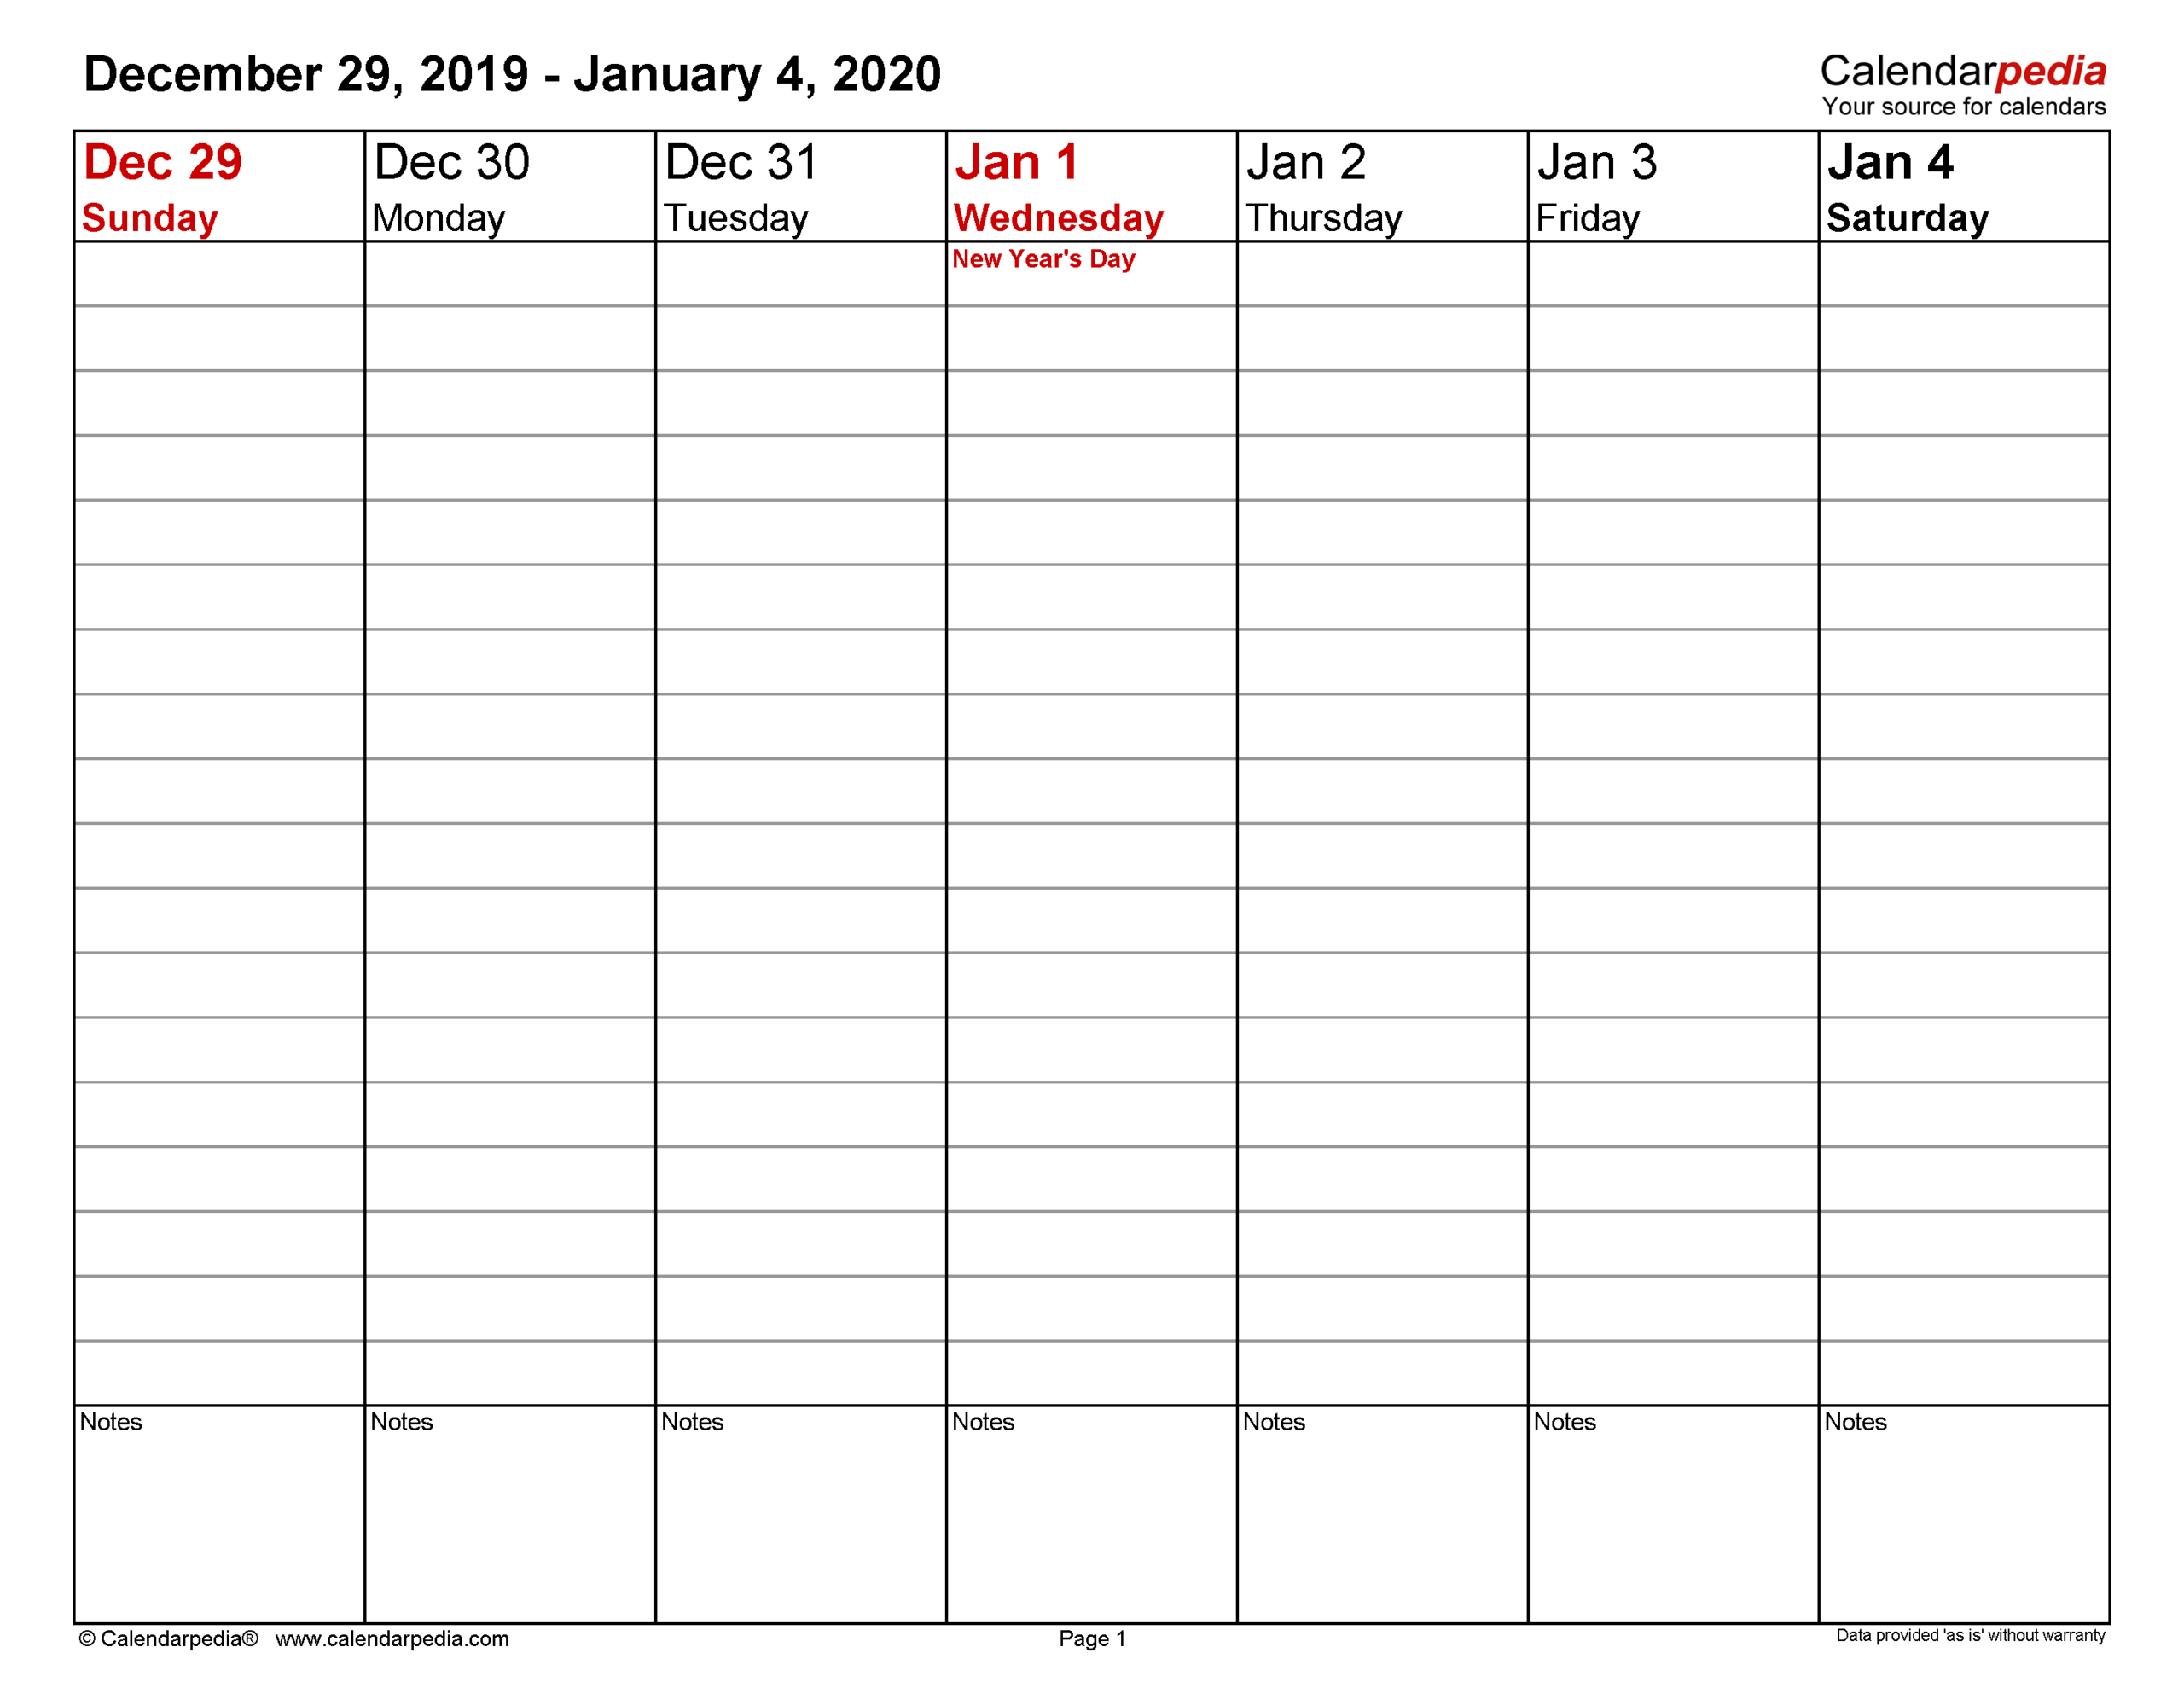 Weekly Calendars 2020 For Word - 12 Free Printable Templates-Hourly Daily Calendar 2021